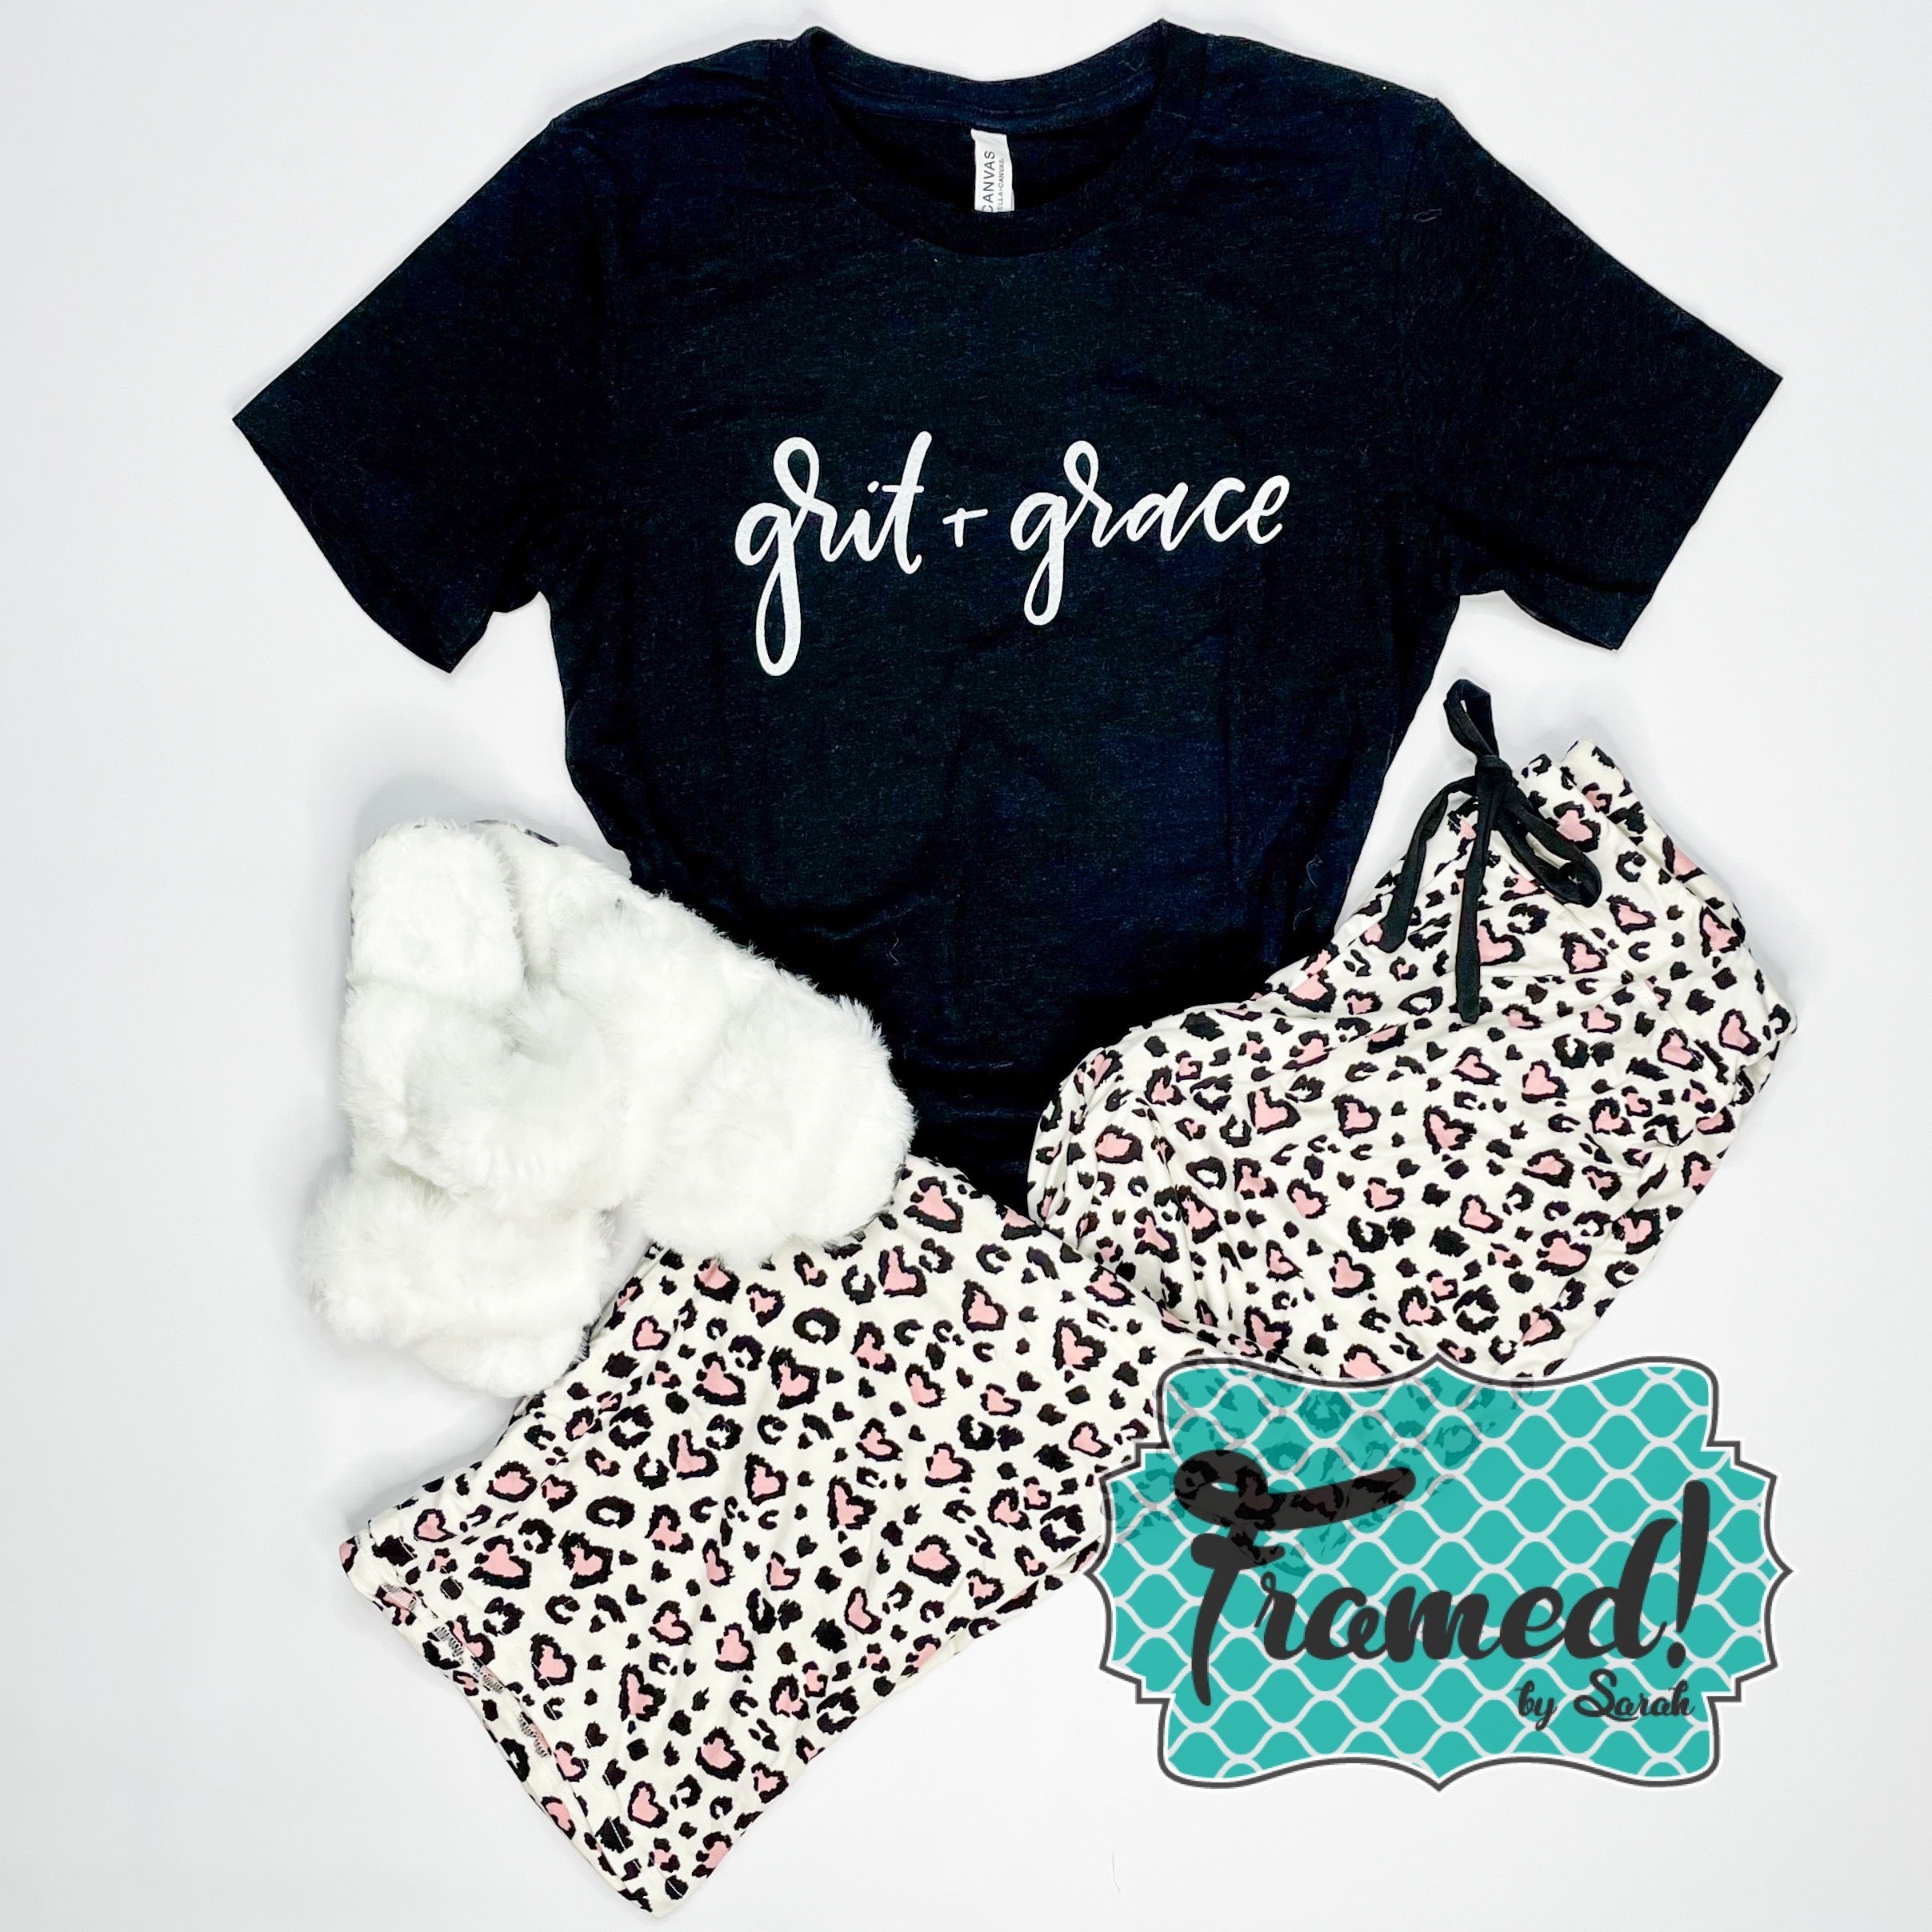 Grit & Grace Graphic Tee (Small Only)